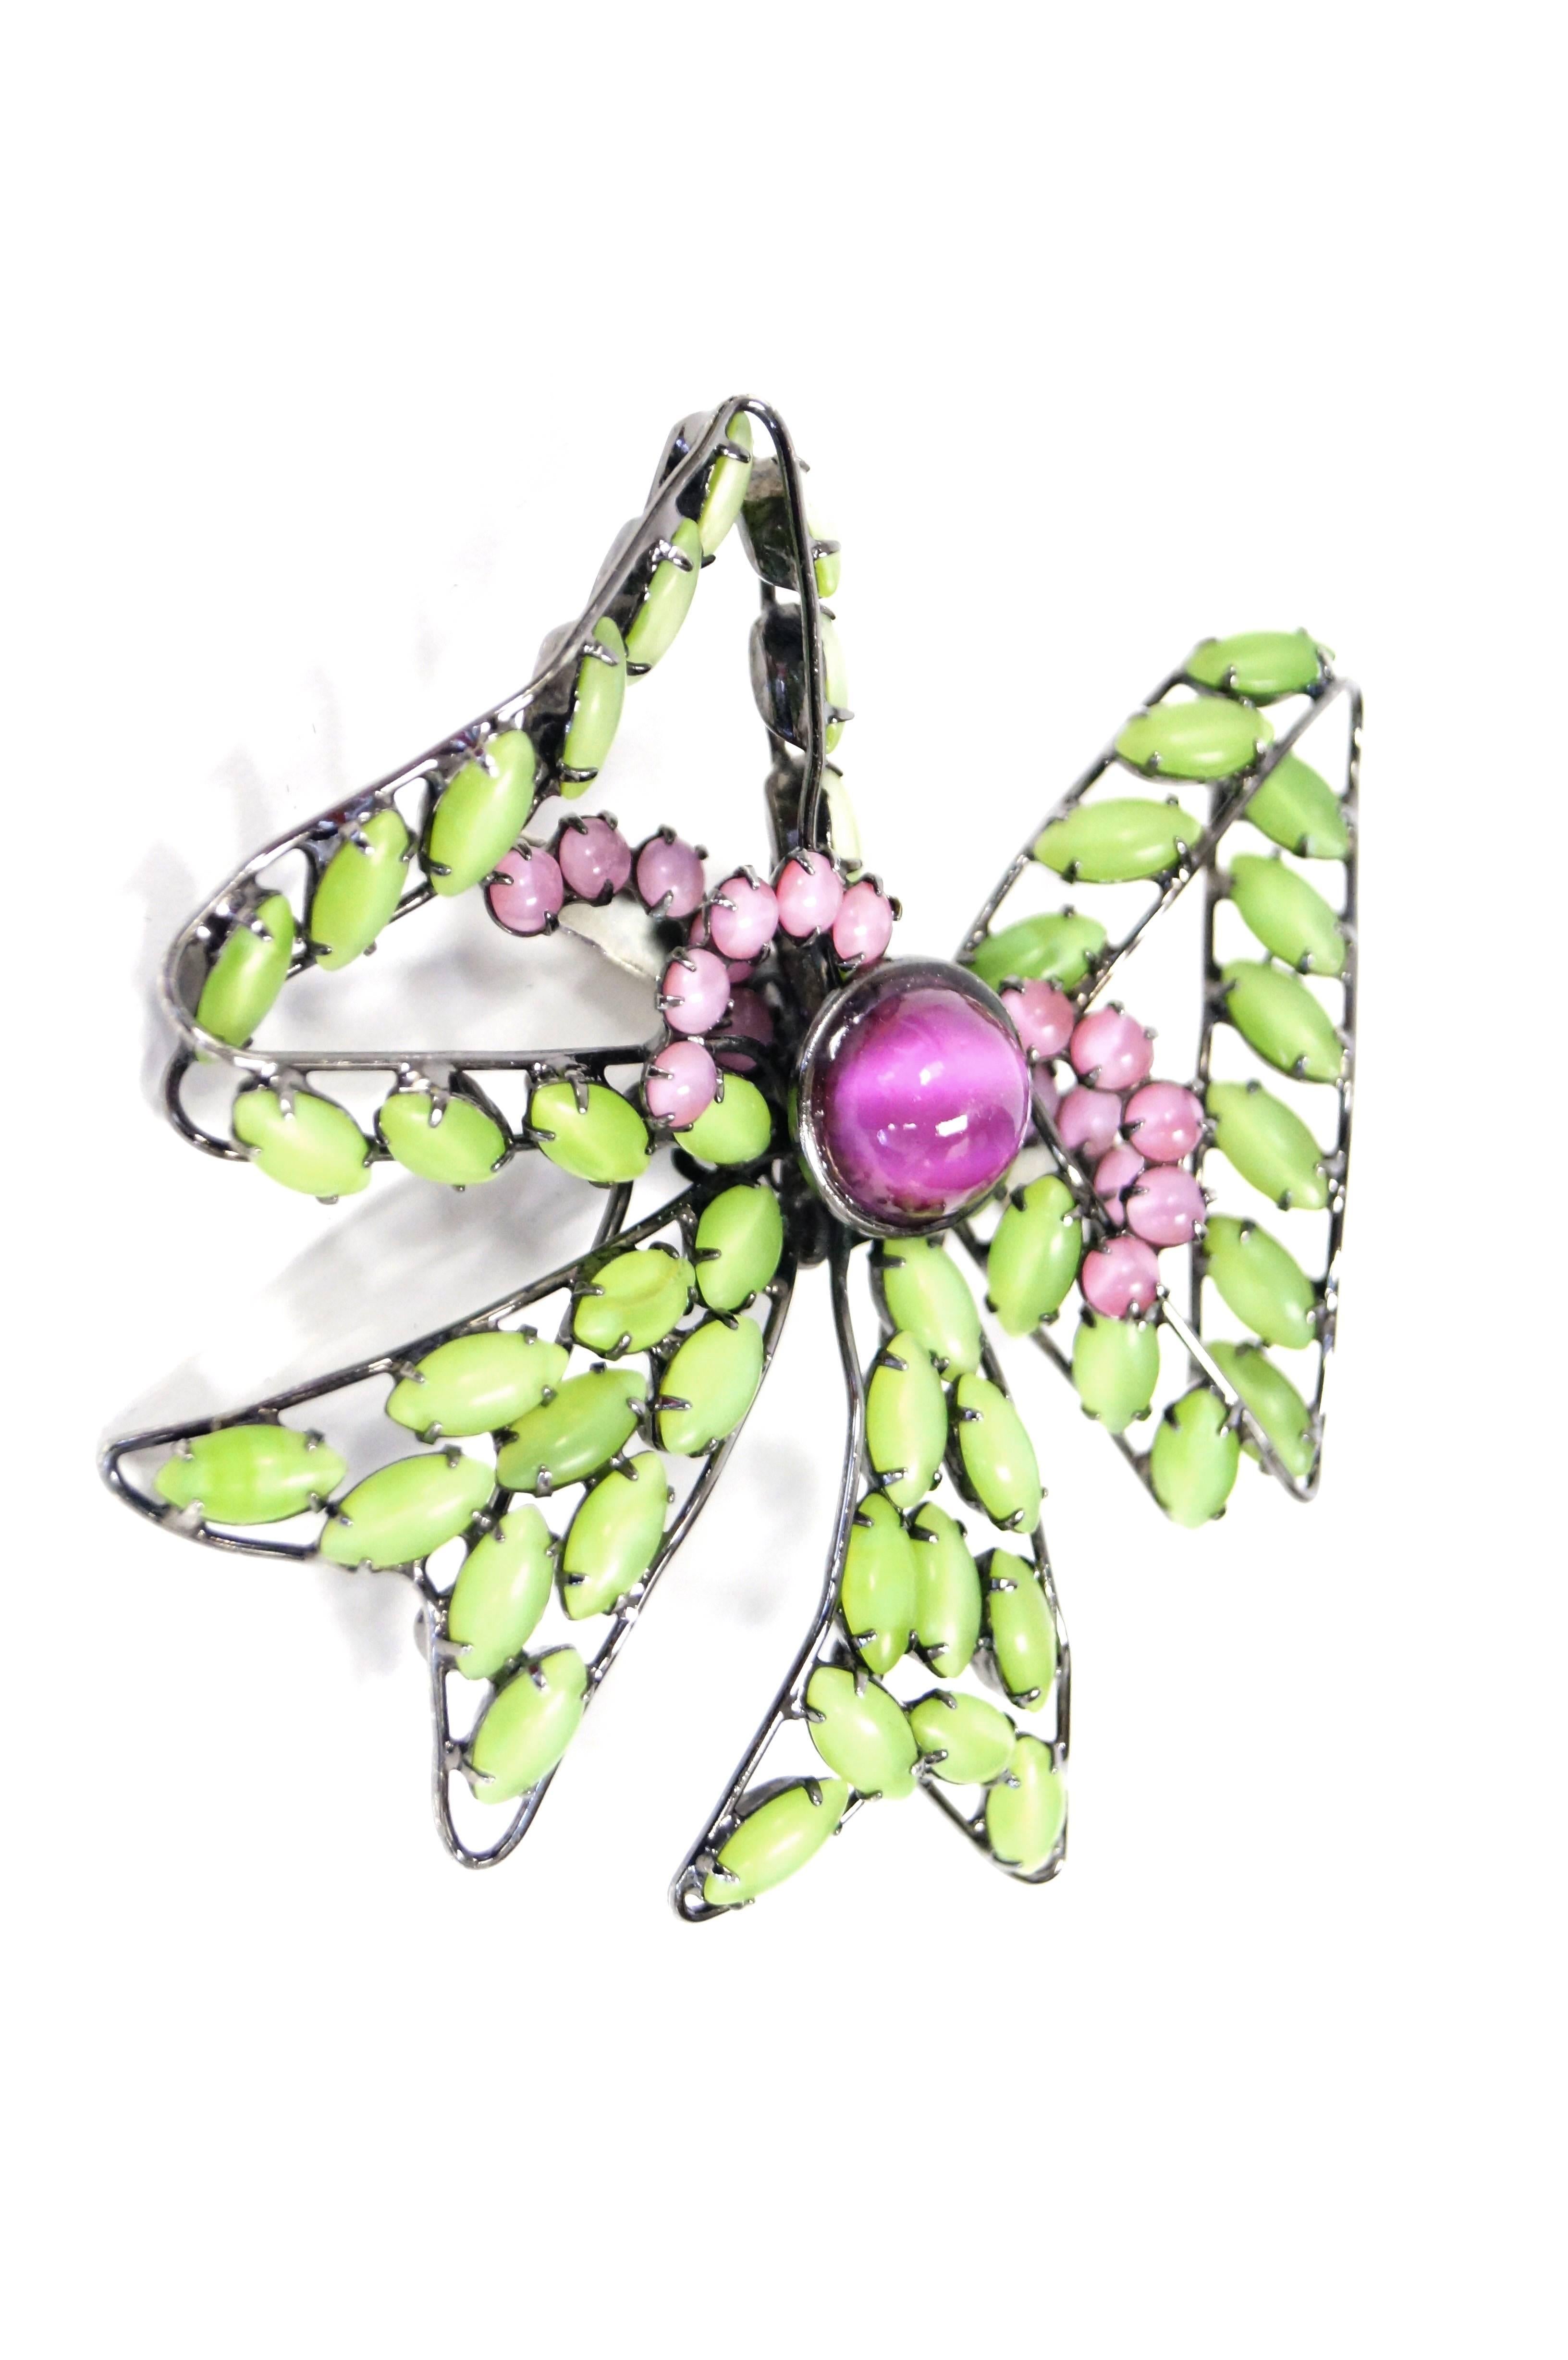 Playful spring green and blossom pink bow brooch by Lawrence Vrba. The bow is composed of frosted green oval marquise cabochons, with a bright pink, round cat-eye cabochon center. The center of the bow is ornamented with two springs of round pink